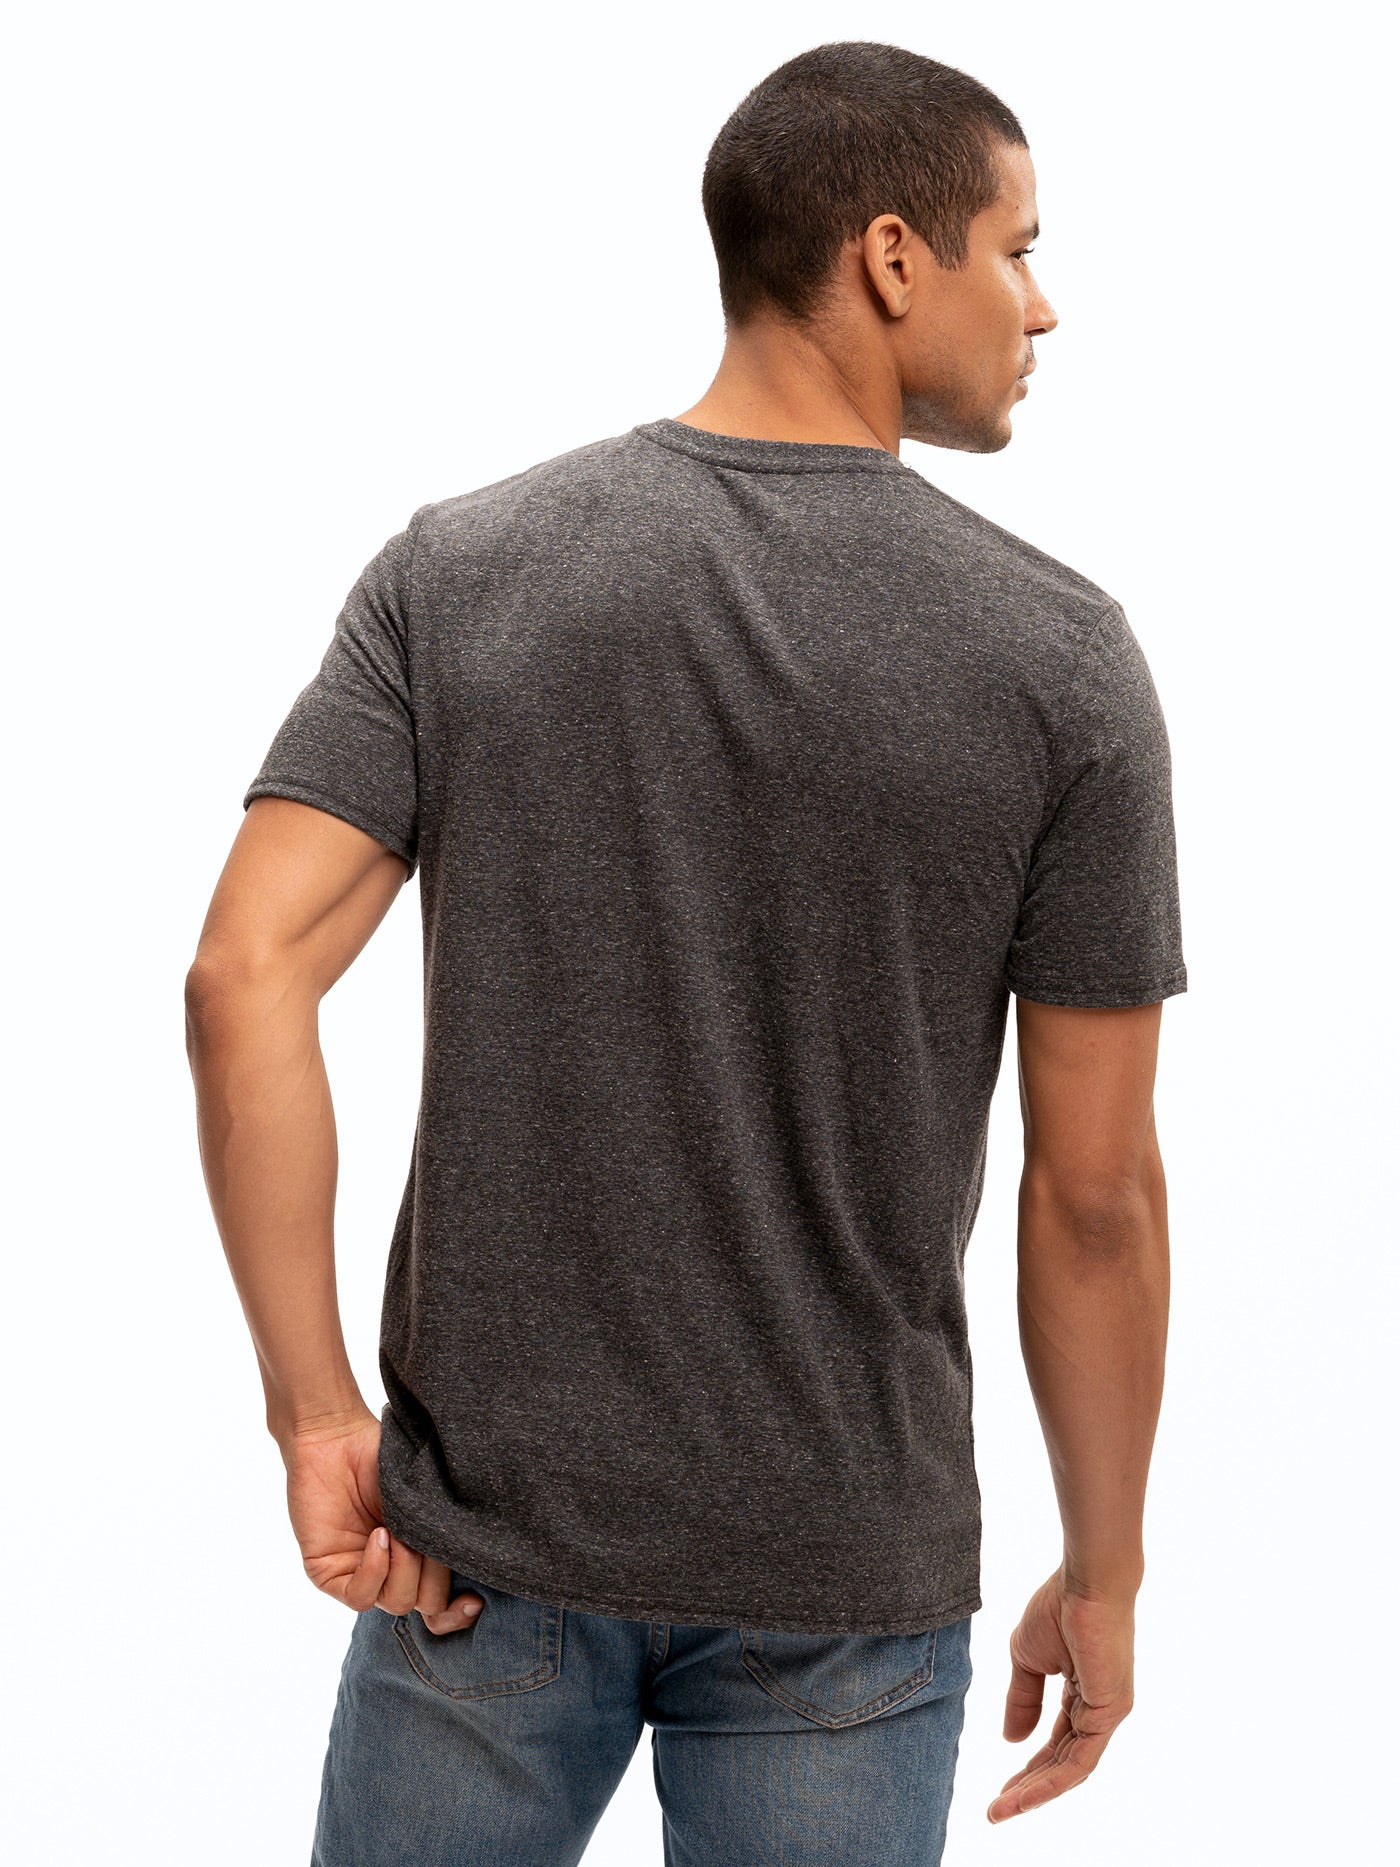 in Tee Neck Crew Threads Grey Thought Triblend – 4 Heather